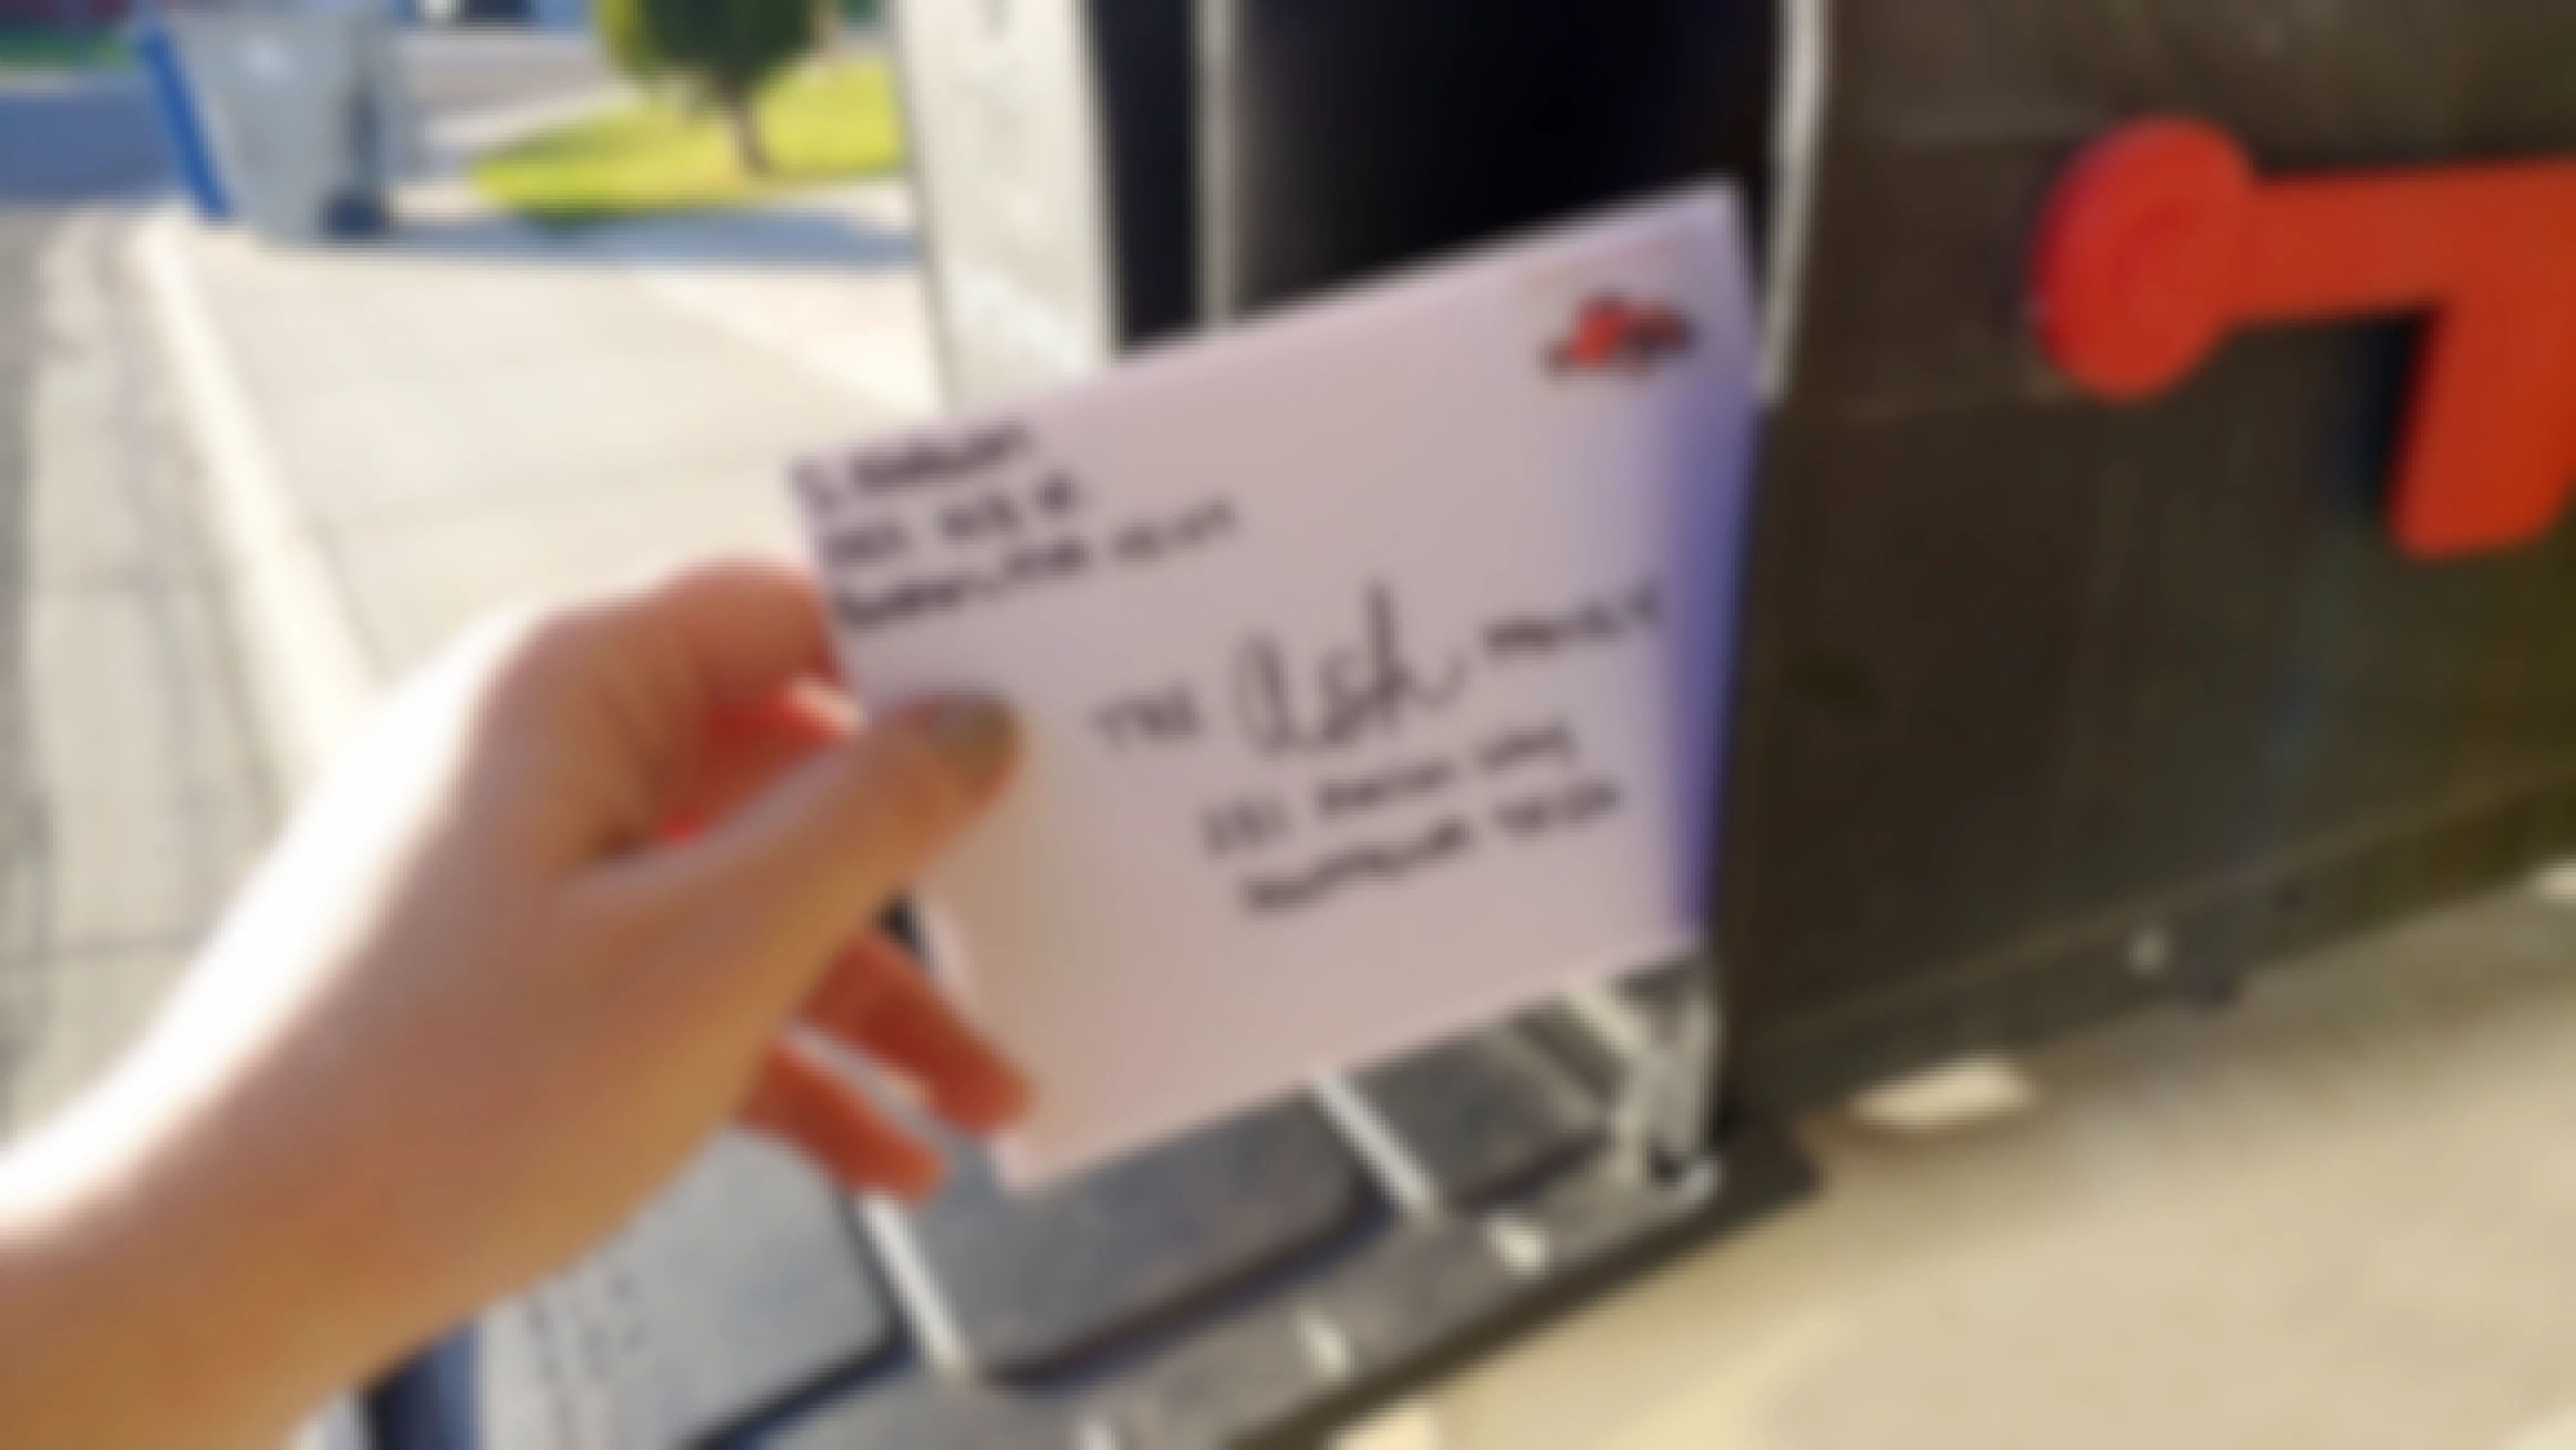 Hand placing a hand written letter into a mailbox